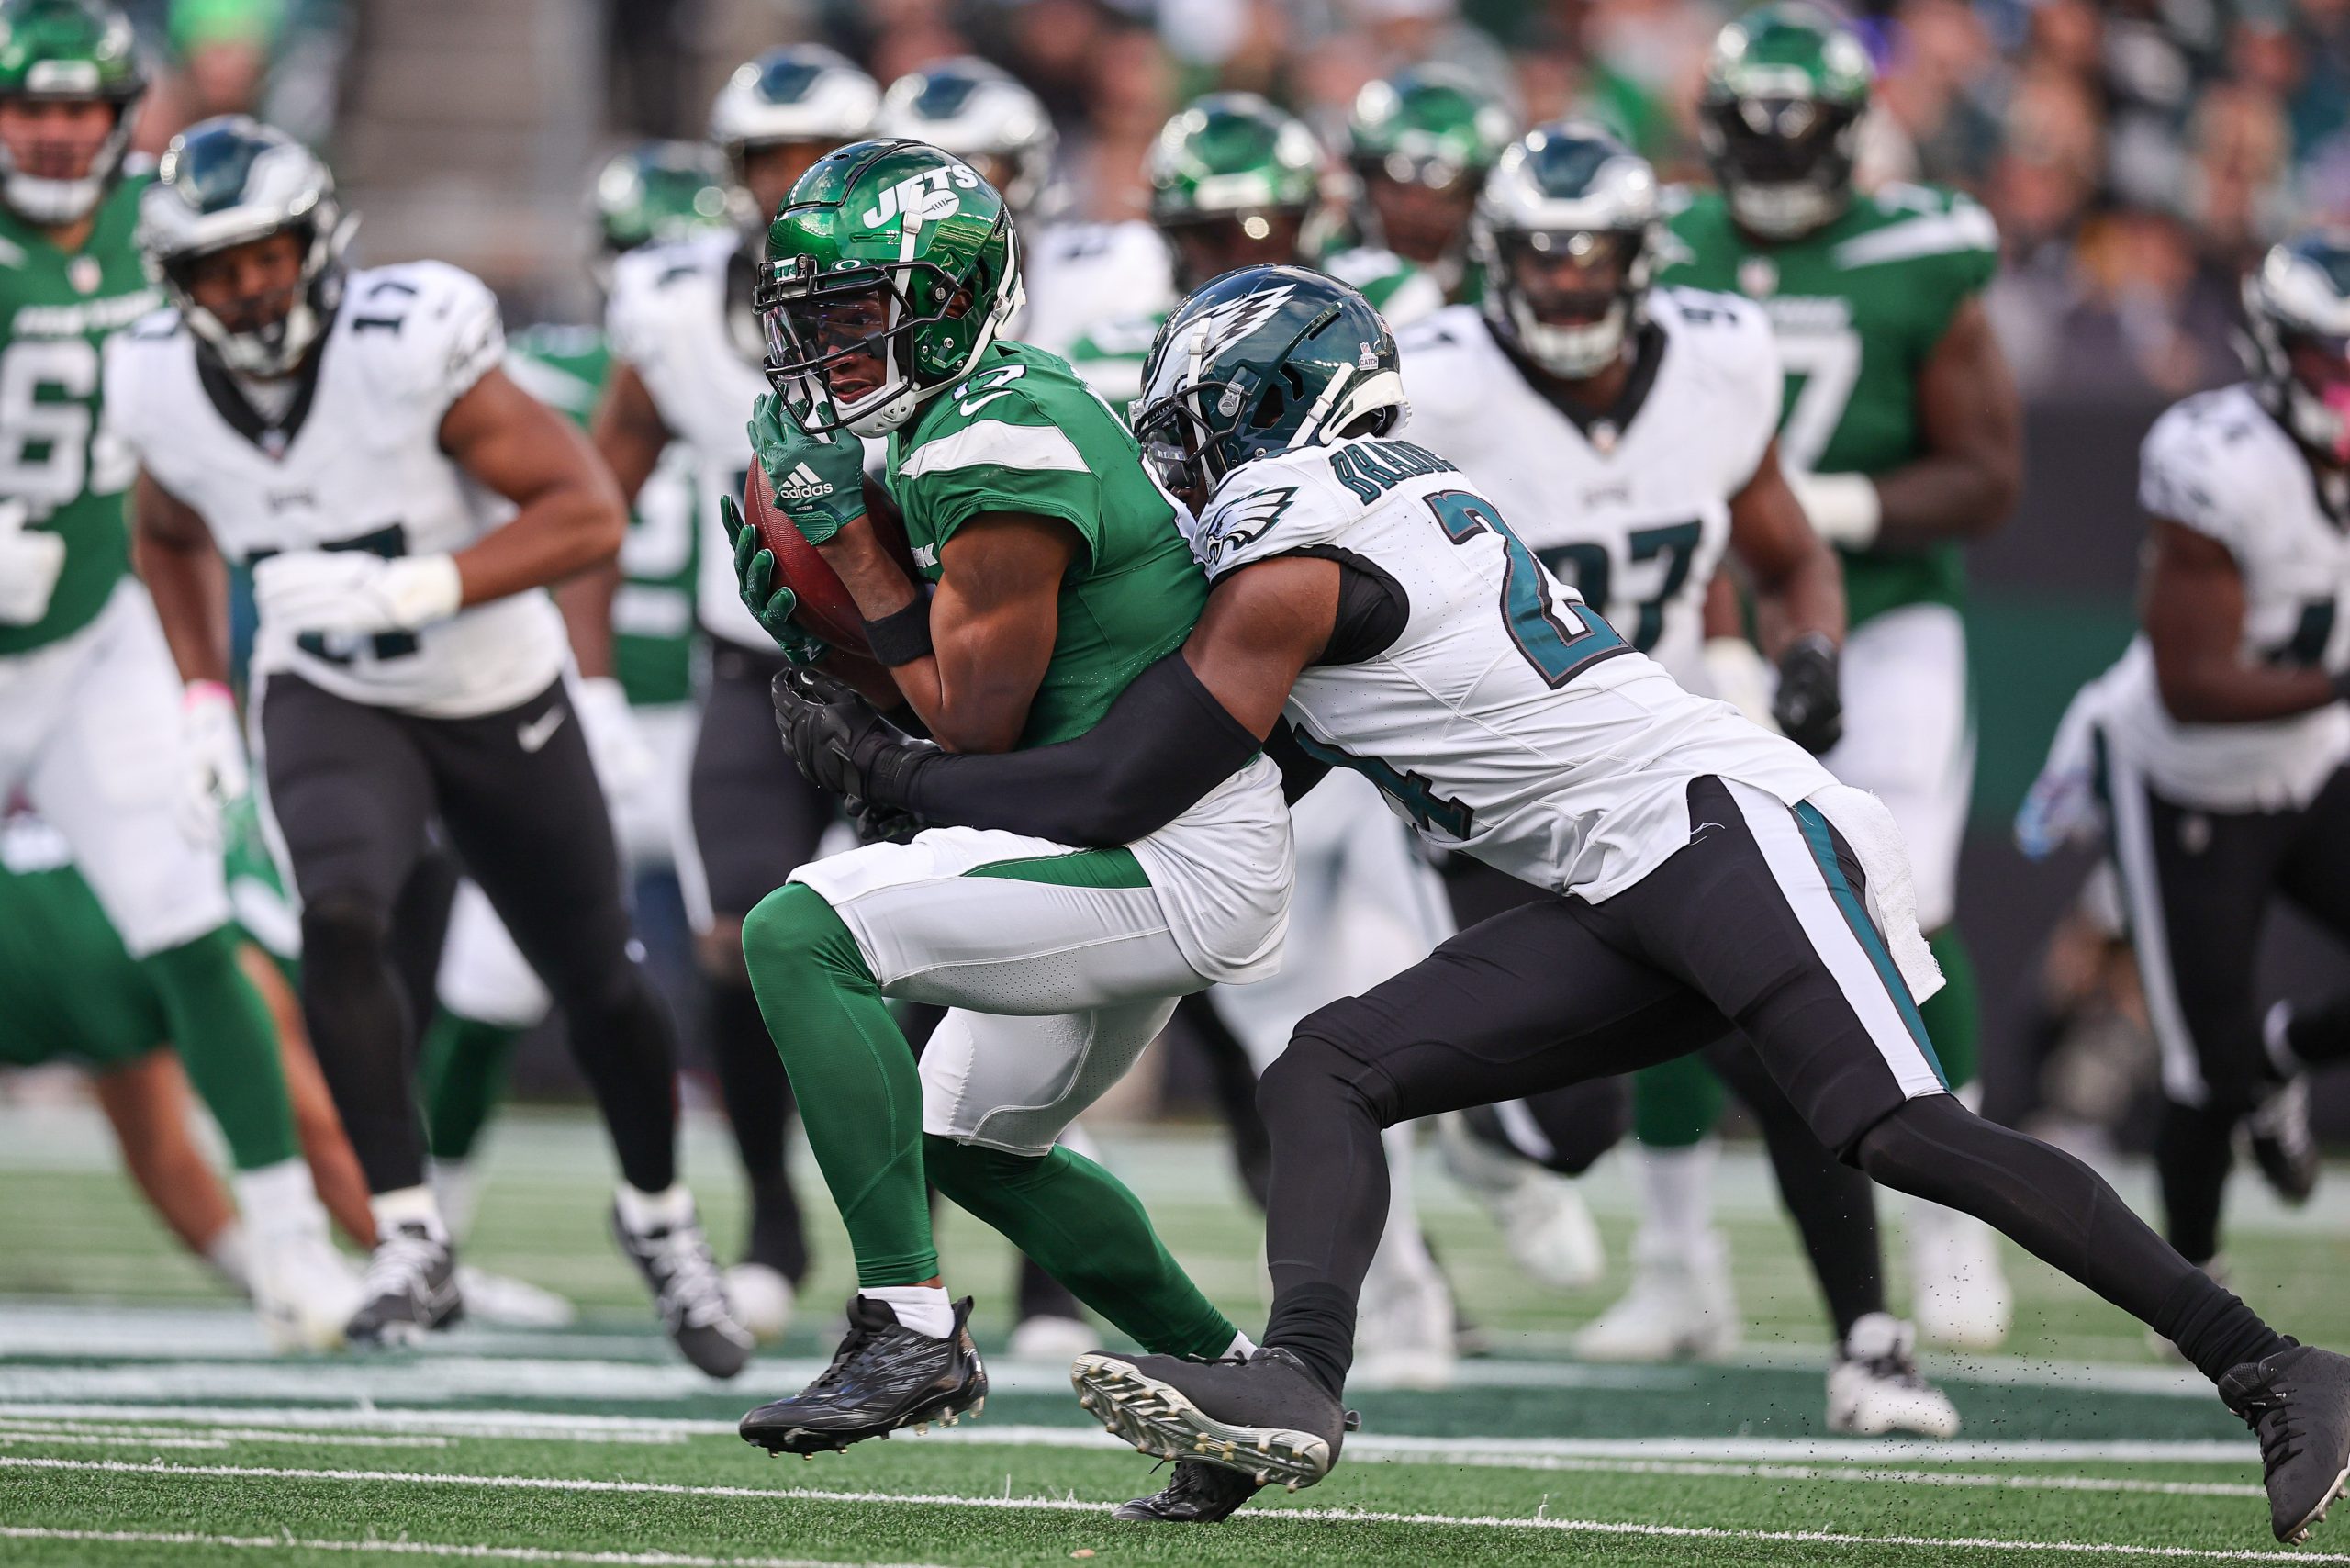 Jets star Garrett Wilson briefly left Sunday's game with an injury. And while he avoided disaster, he also bashed his home field's turf. Photo Credit: Vincent Carchietta-USA TODAY Sports